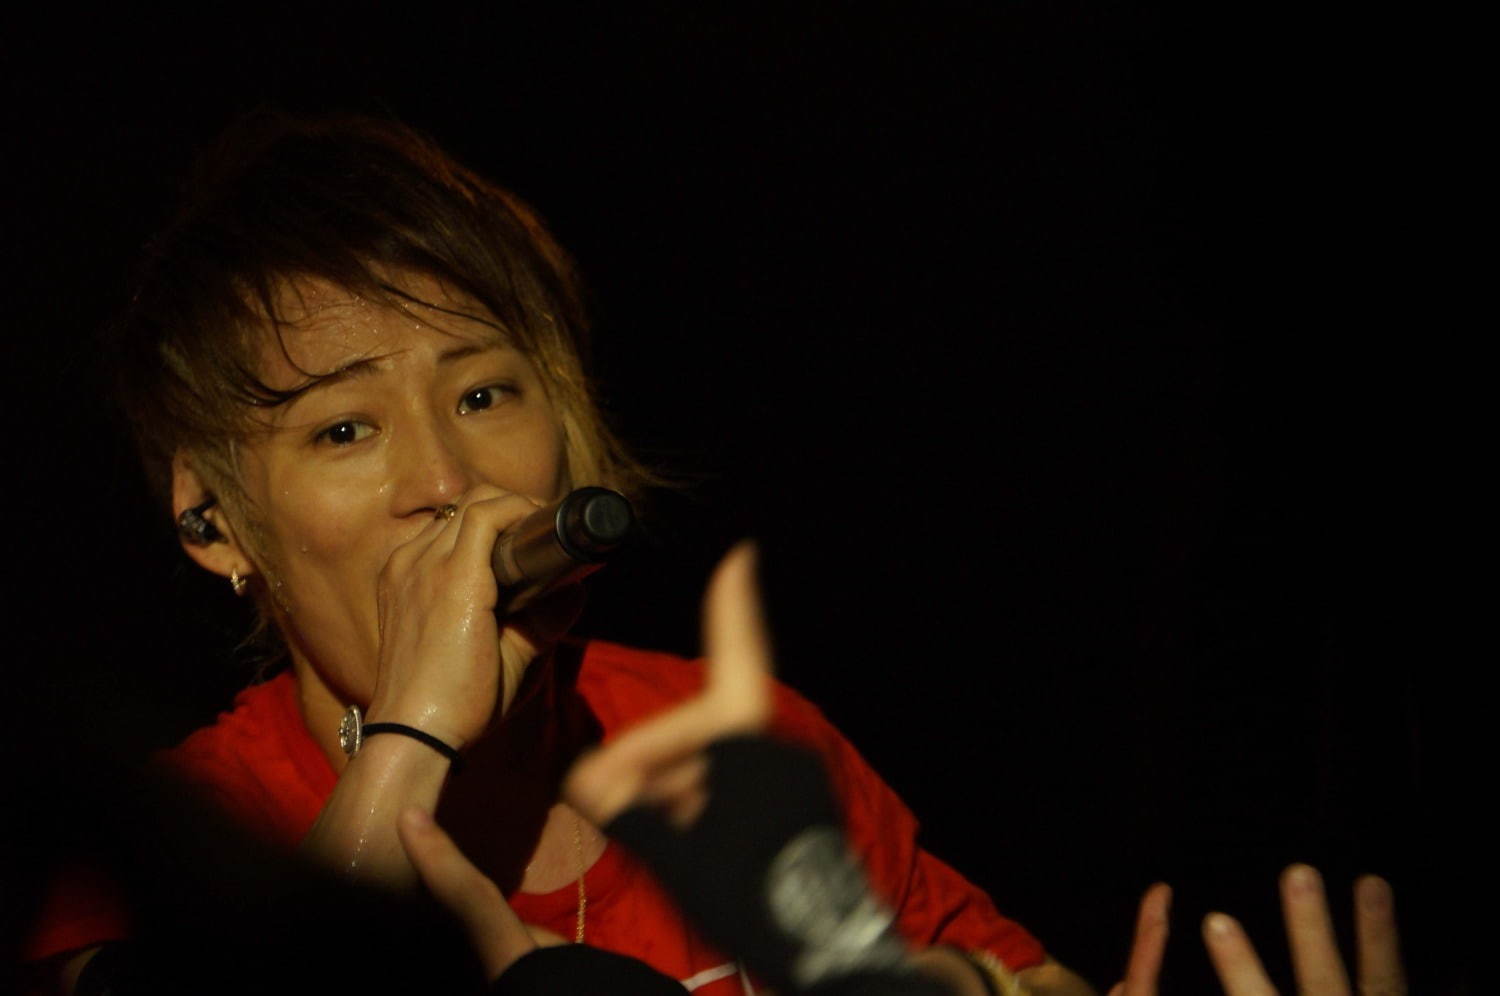 UVERworld DOCUMENTARY THE SONG
©2012 Sony Music Records Inc.